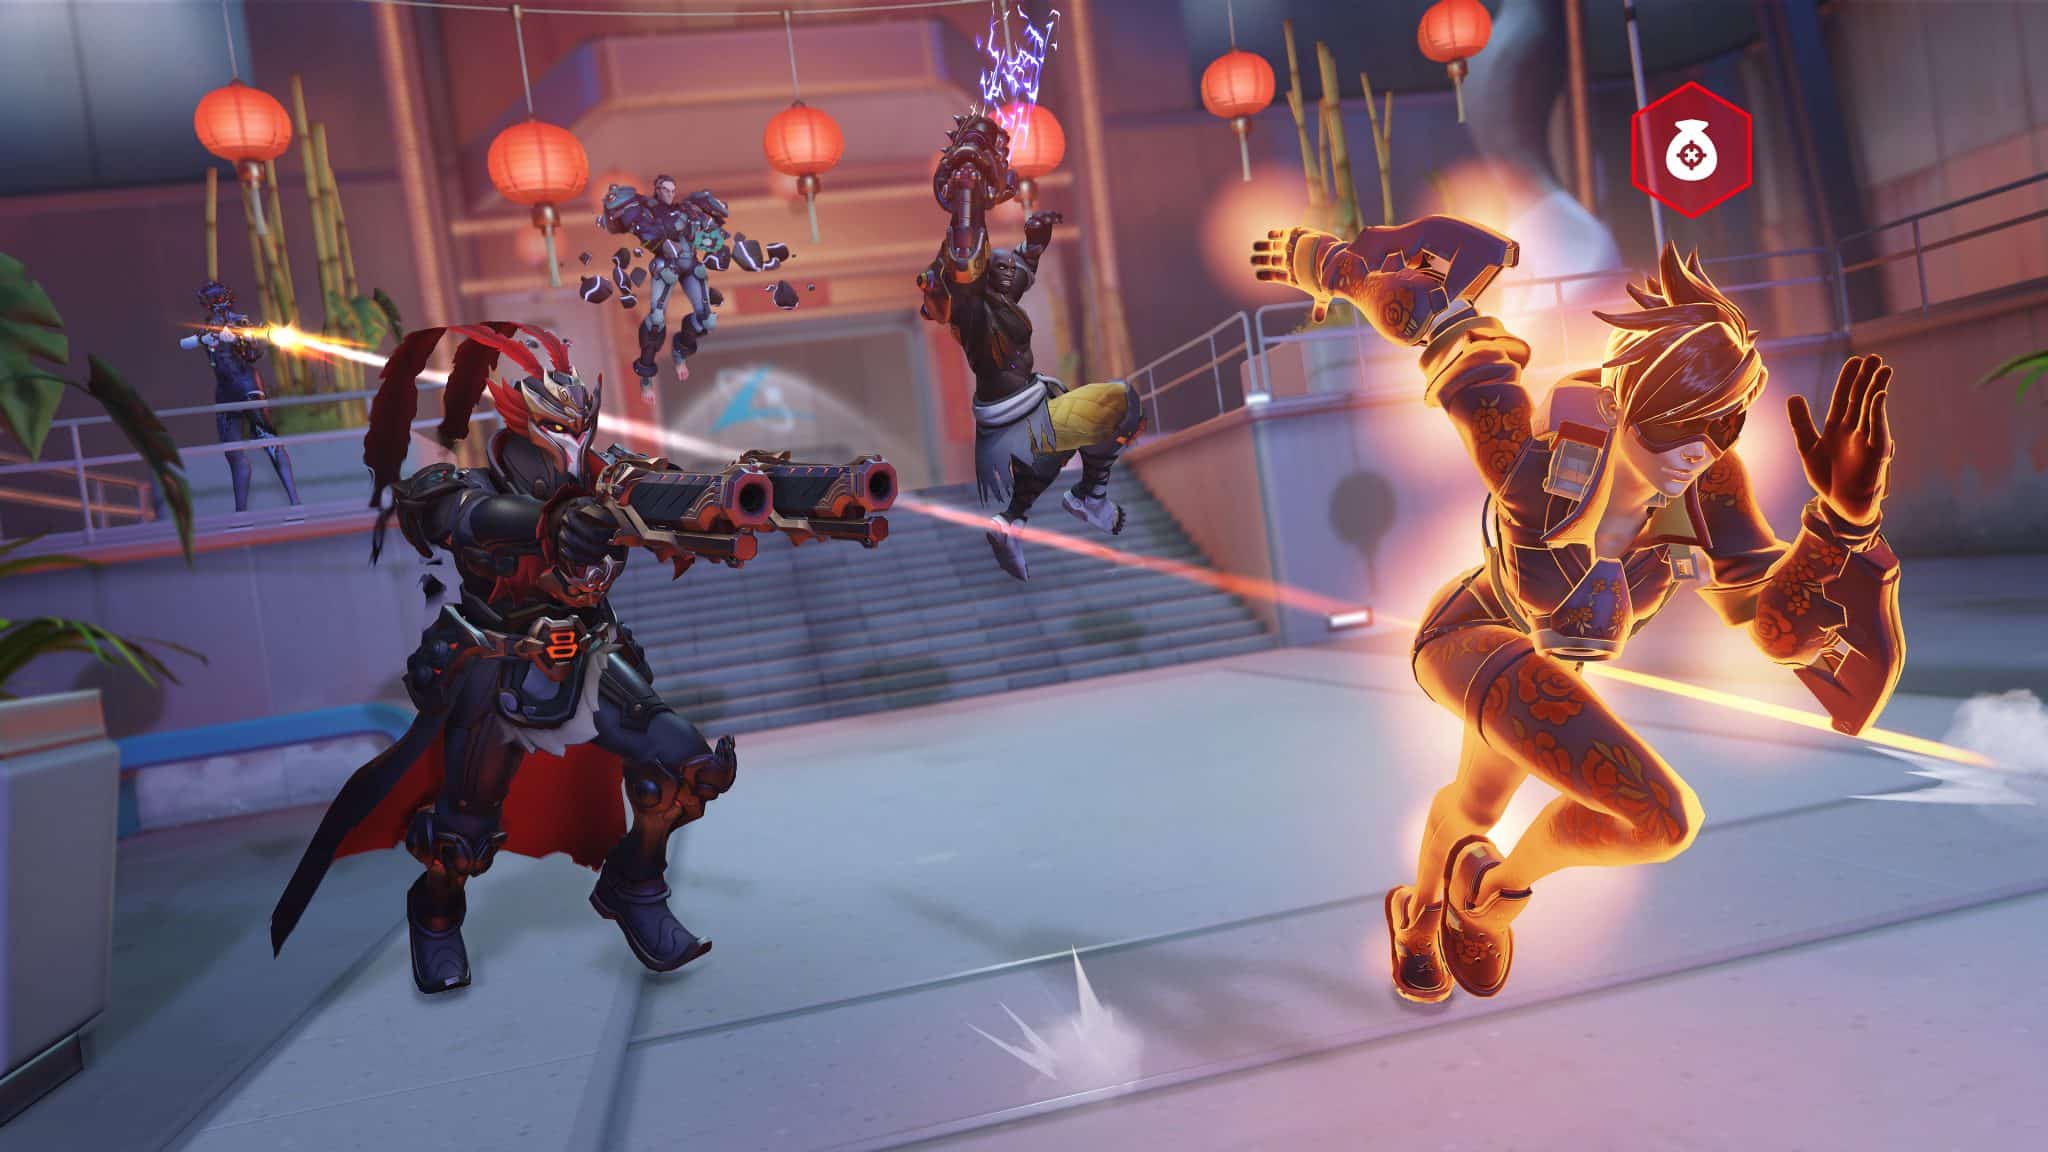 Overwatch Lunar New Year event – release date, new map, game mode